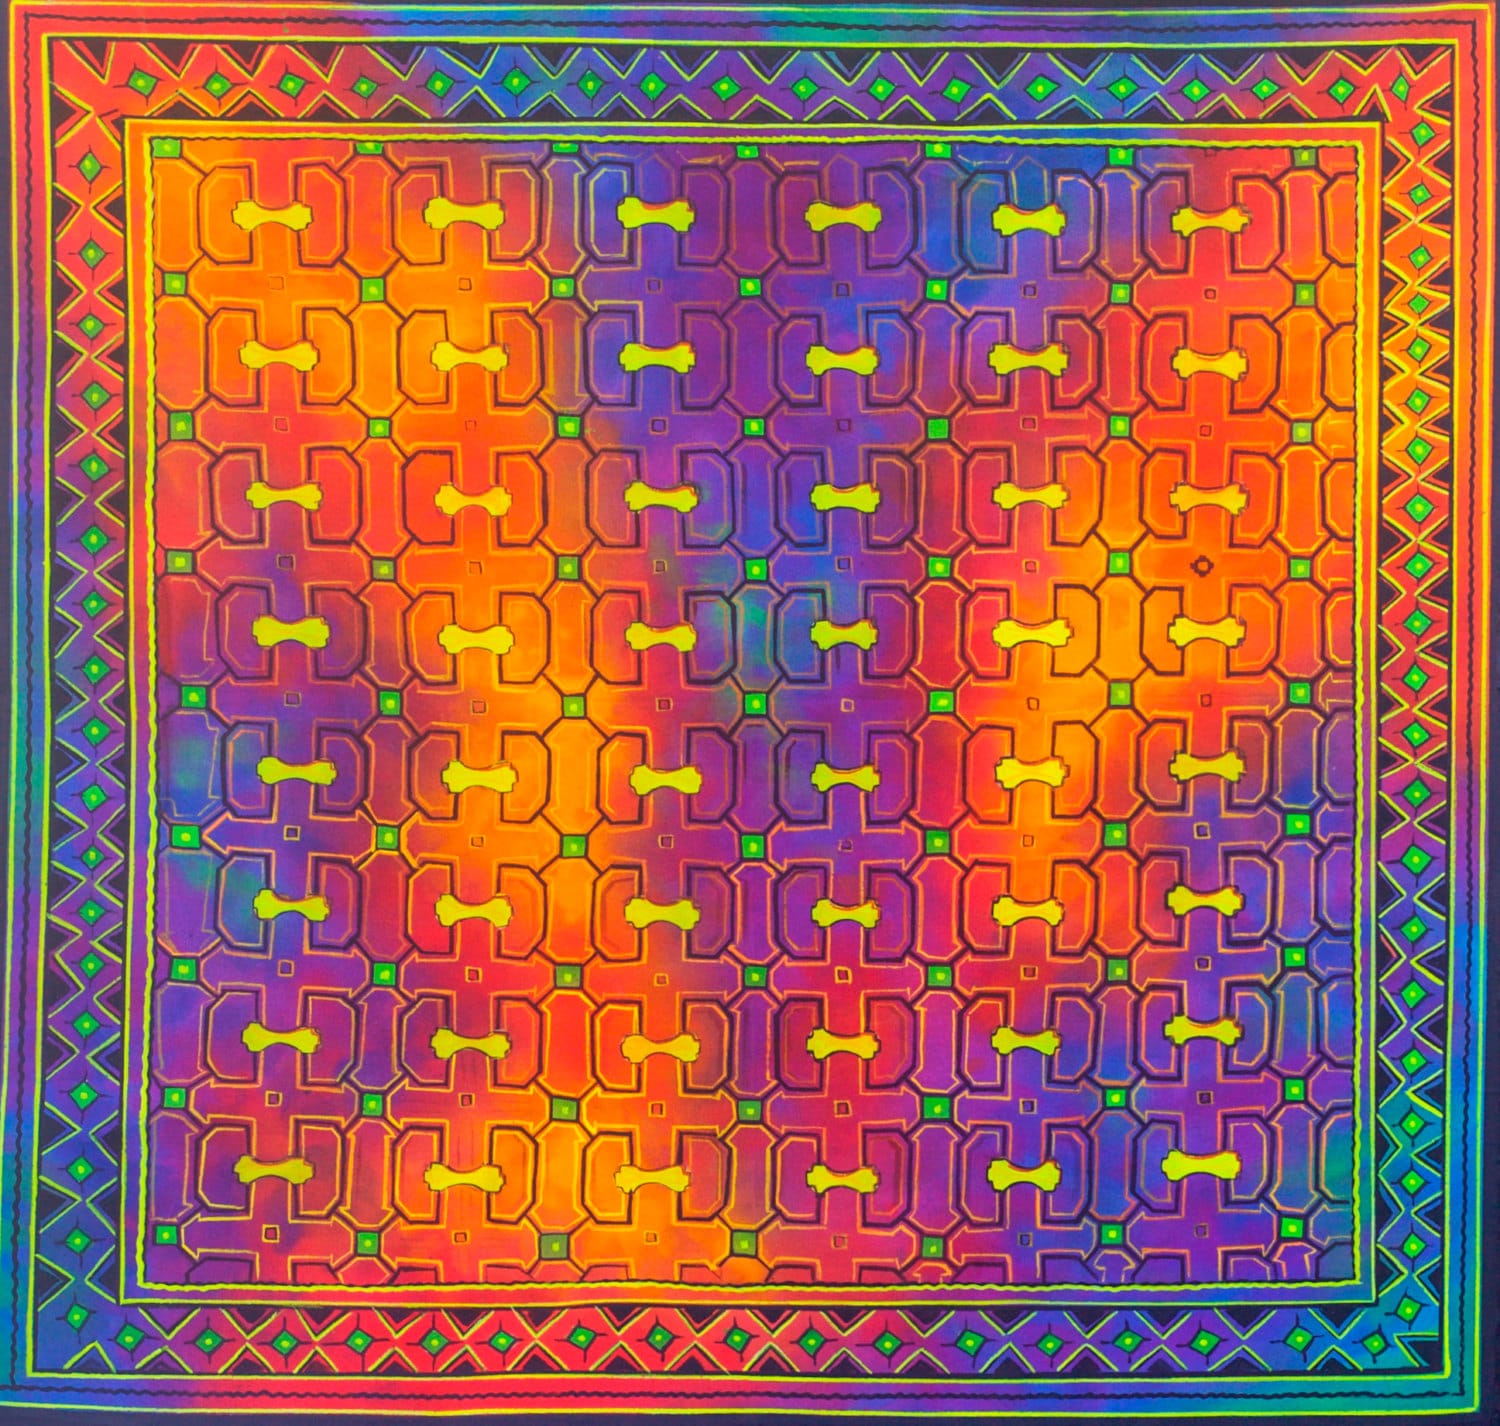 Rainbow Ayahuasca UV Painting - fully blacklight glowing colors - psychedelic artwork